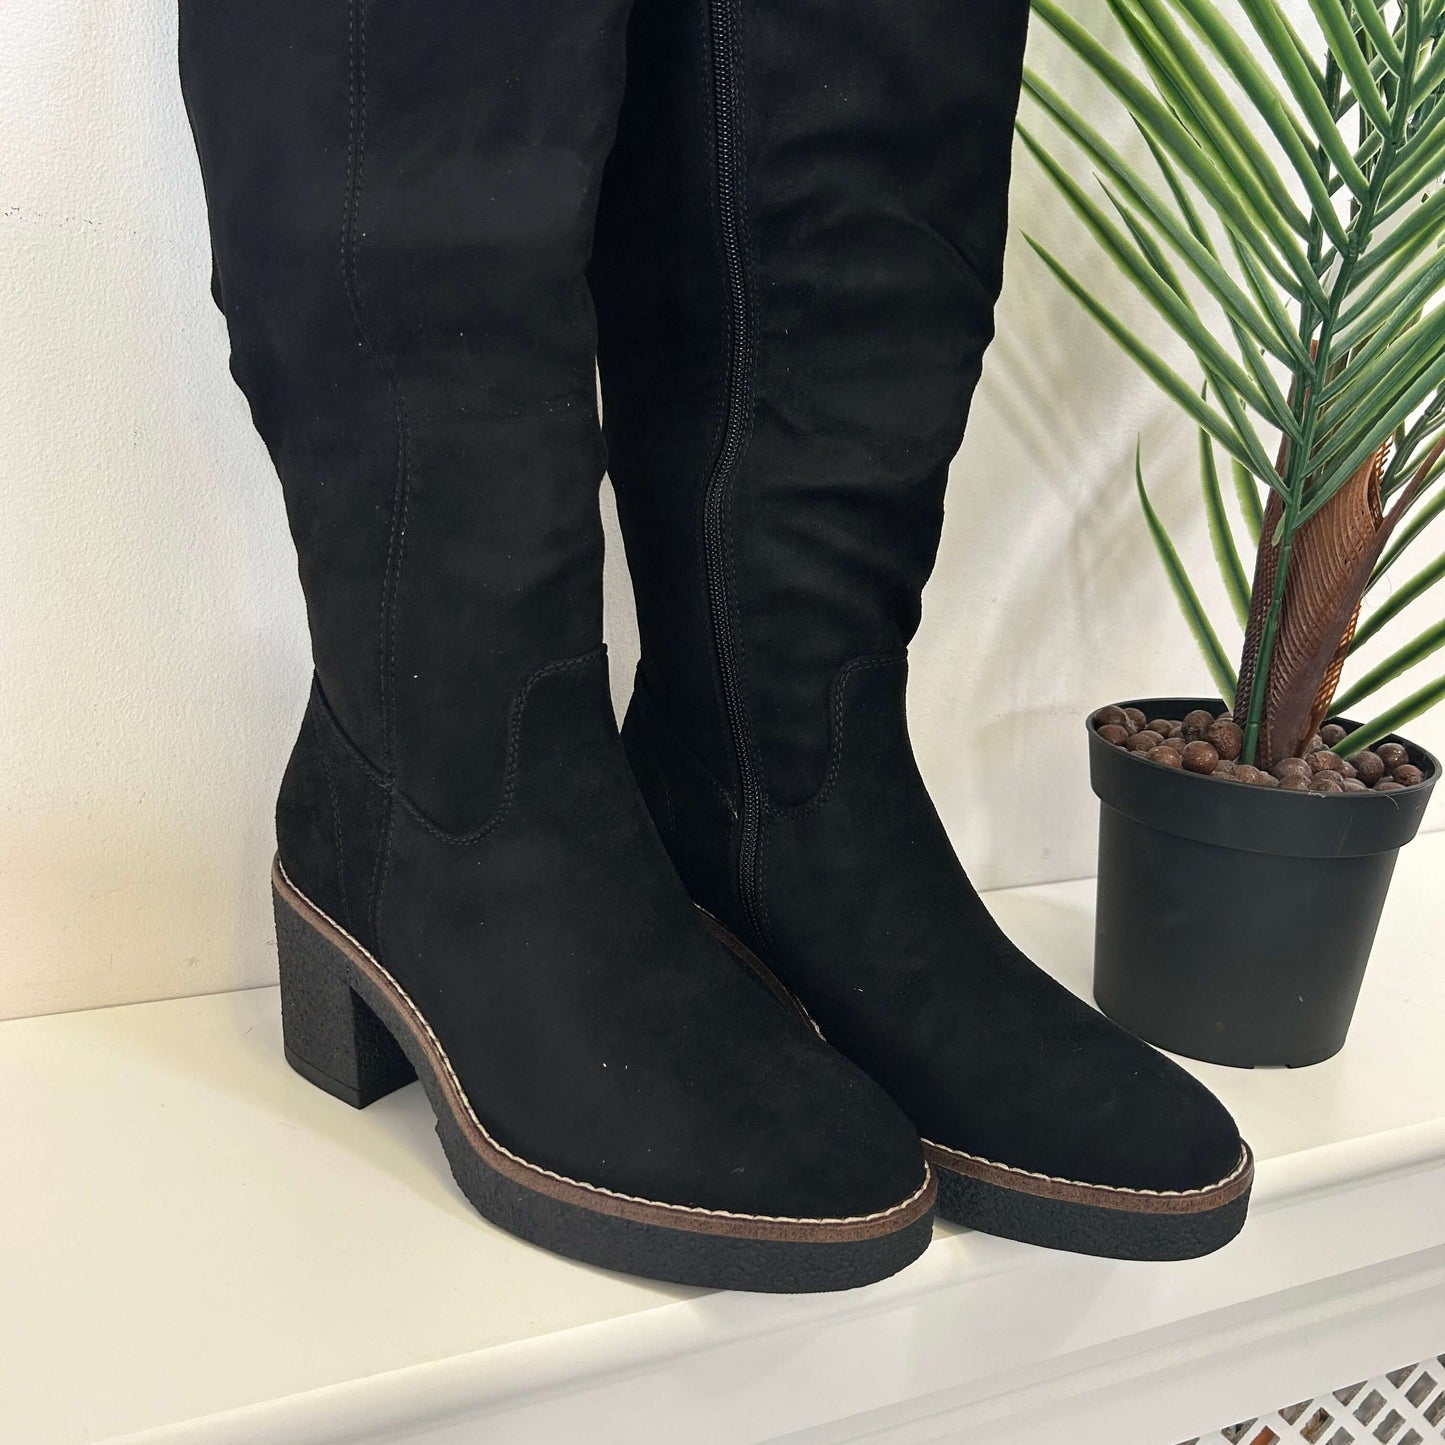 Refresh Black Faux Suede Tall Ladies Boots